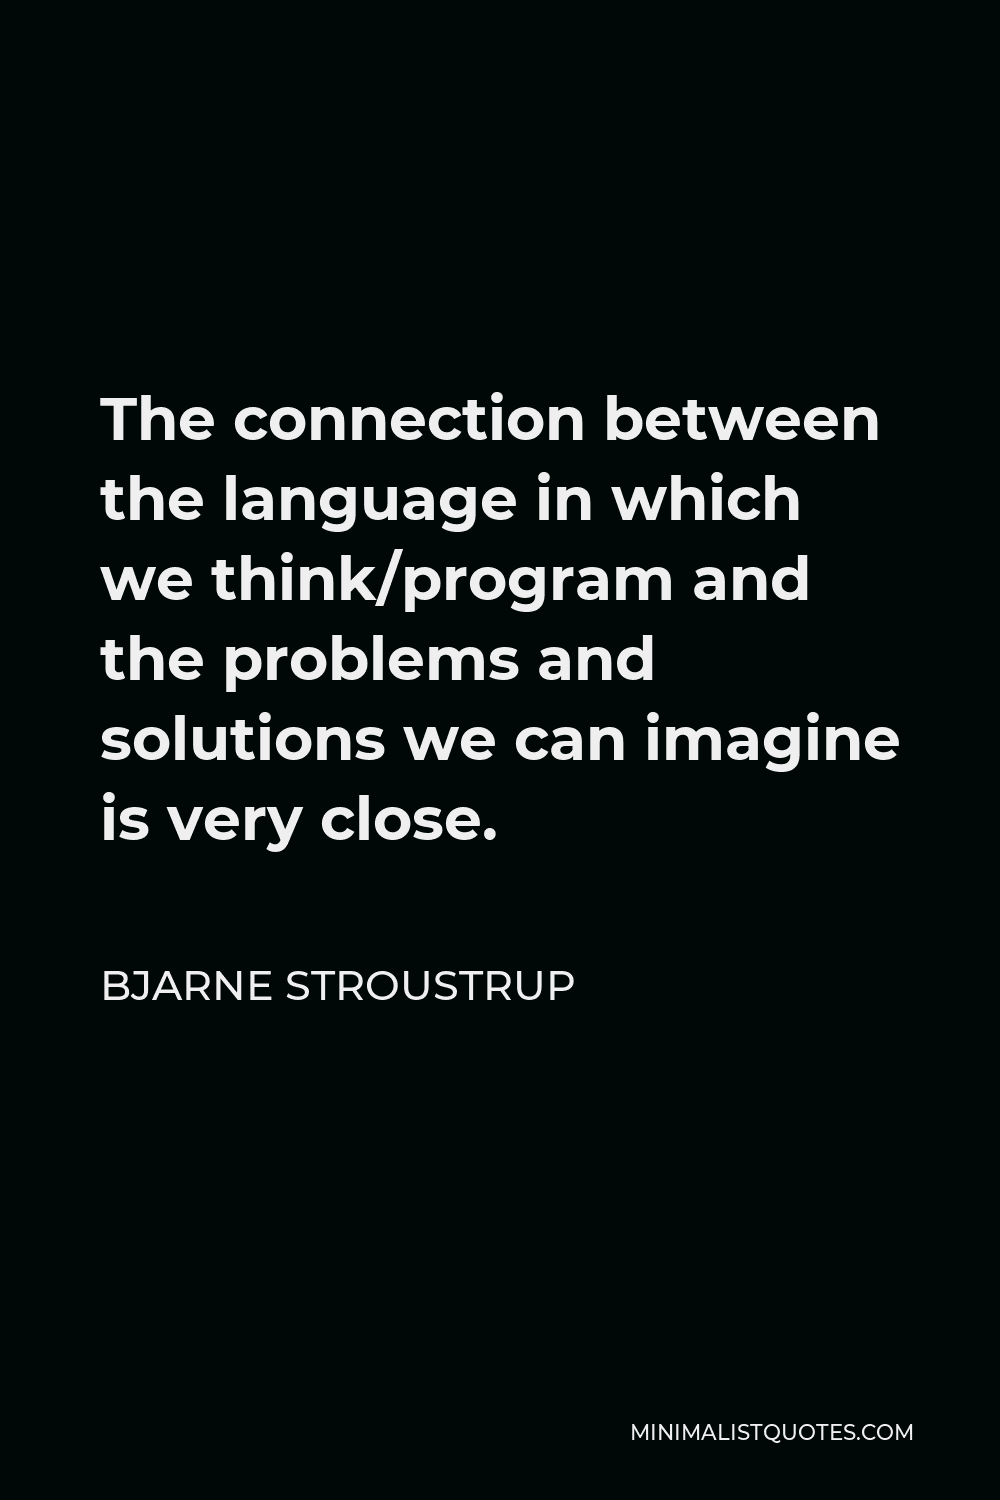 Bjarne Stroustrup Quote - The connection between the language in which we think/program and the problems and solutions we can imagine is very close.